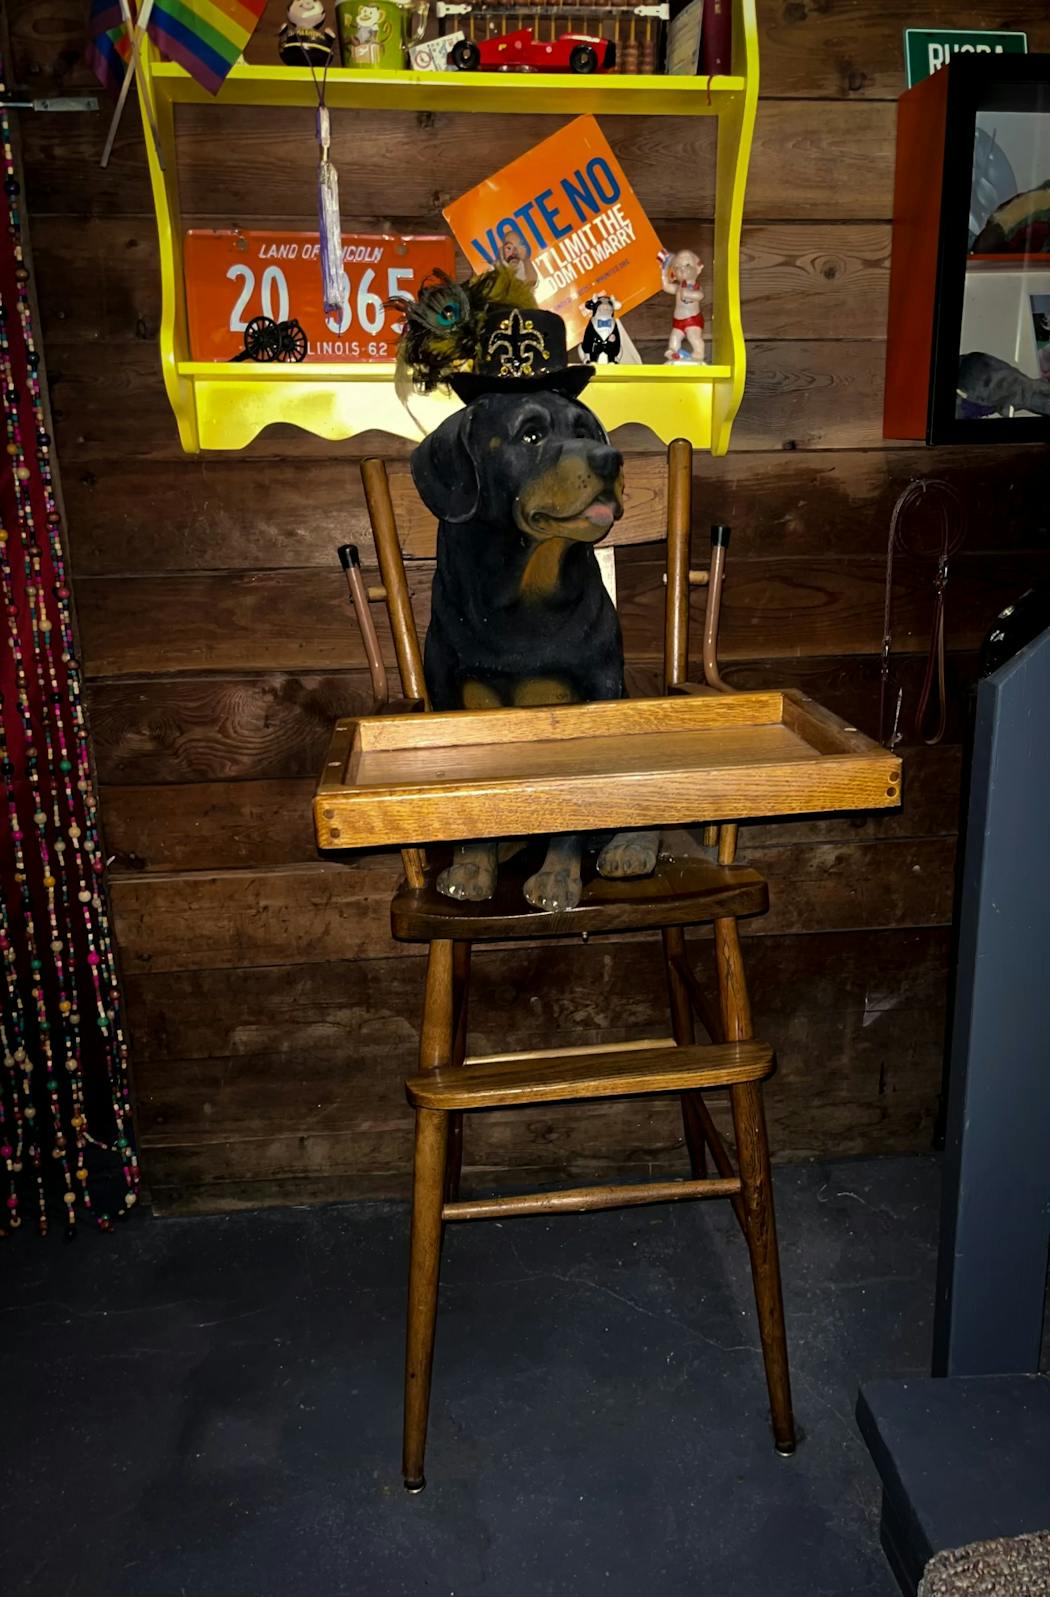 Tim Herbstrith finished the basement of his south Minneapolis home and created a 'speakeasy' decorated with repurposed family heirlooms. He turned his dad's old high chair into a host stand complete with a porcelain rottweiler that greets visitors.